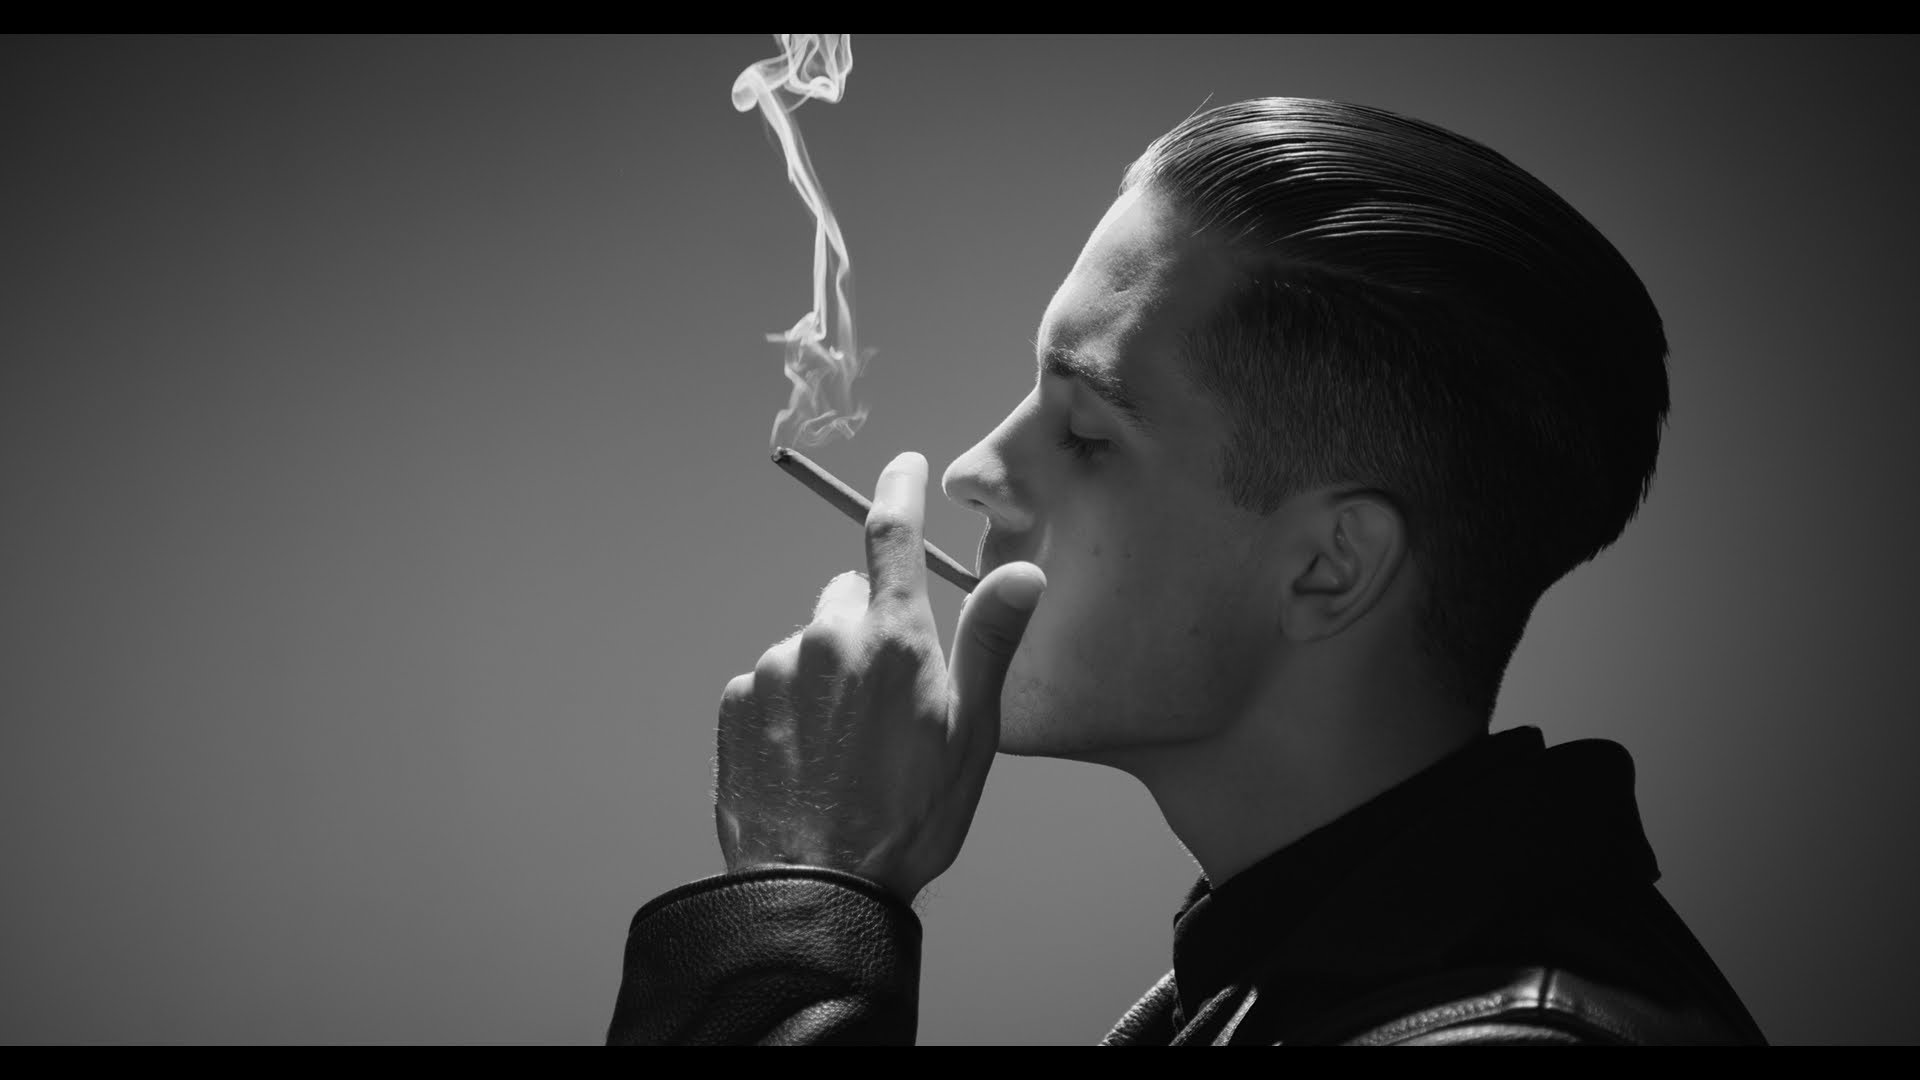 G-Eazy - Been On